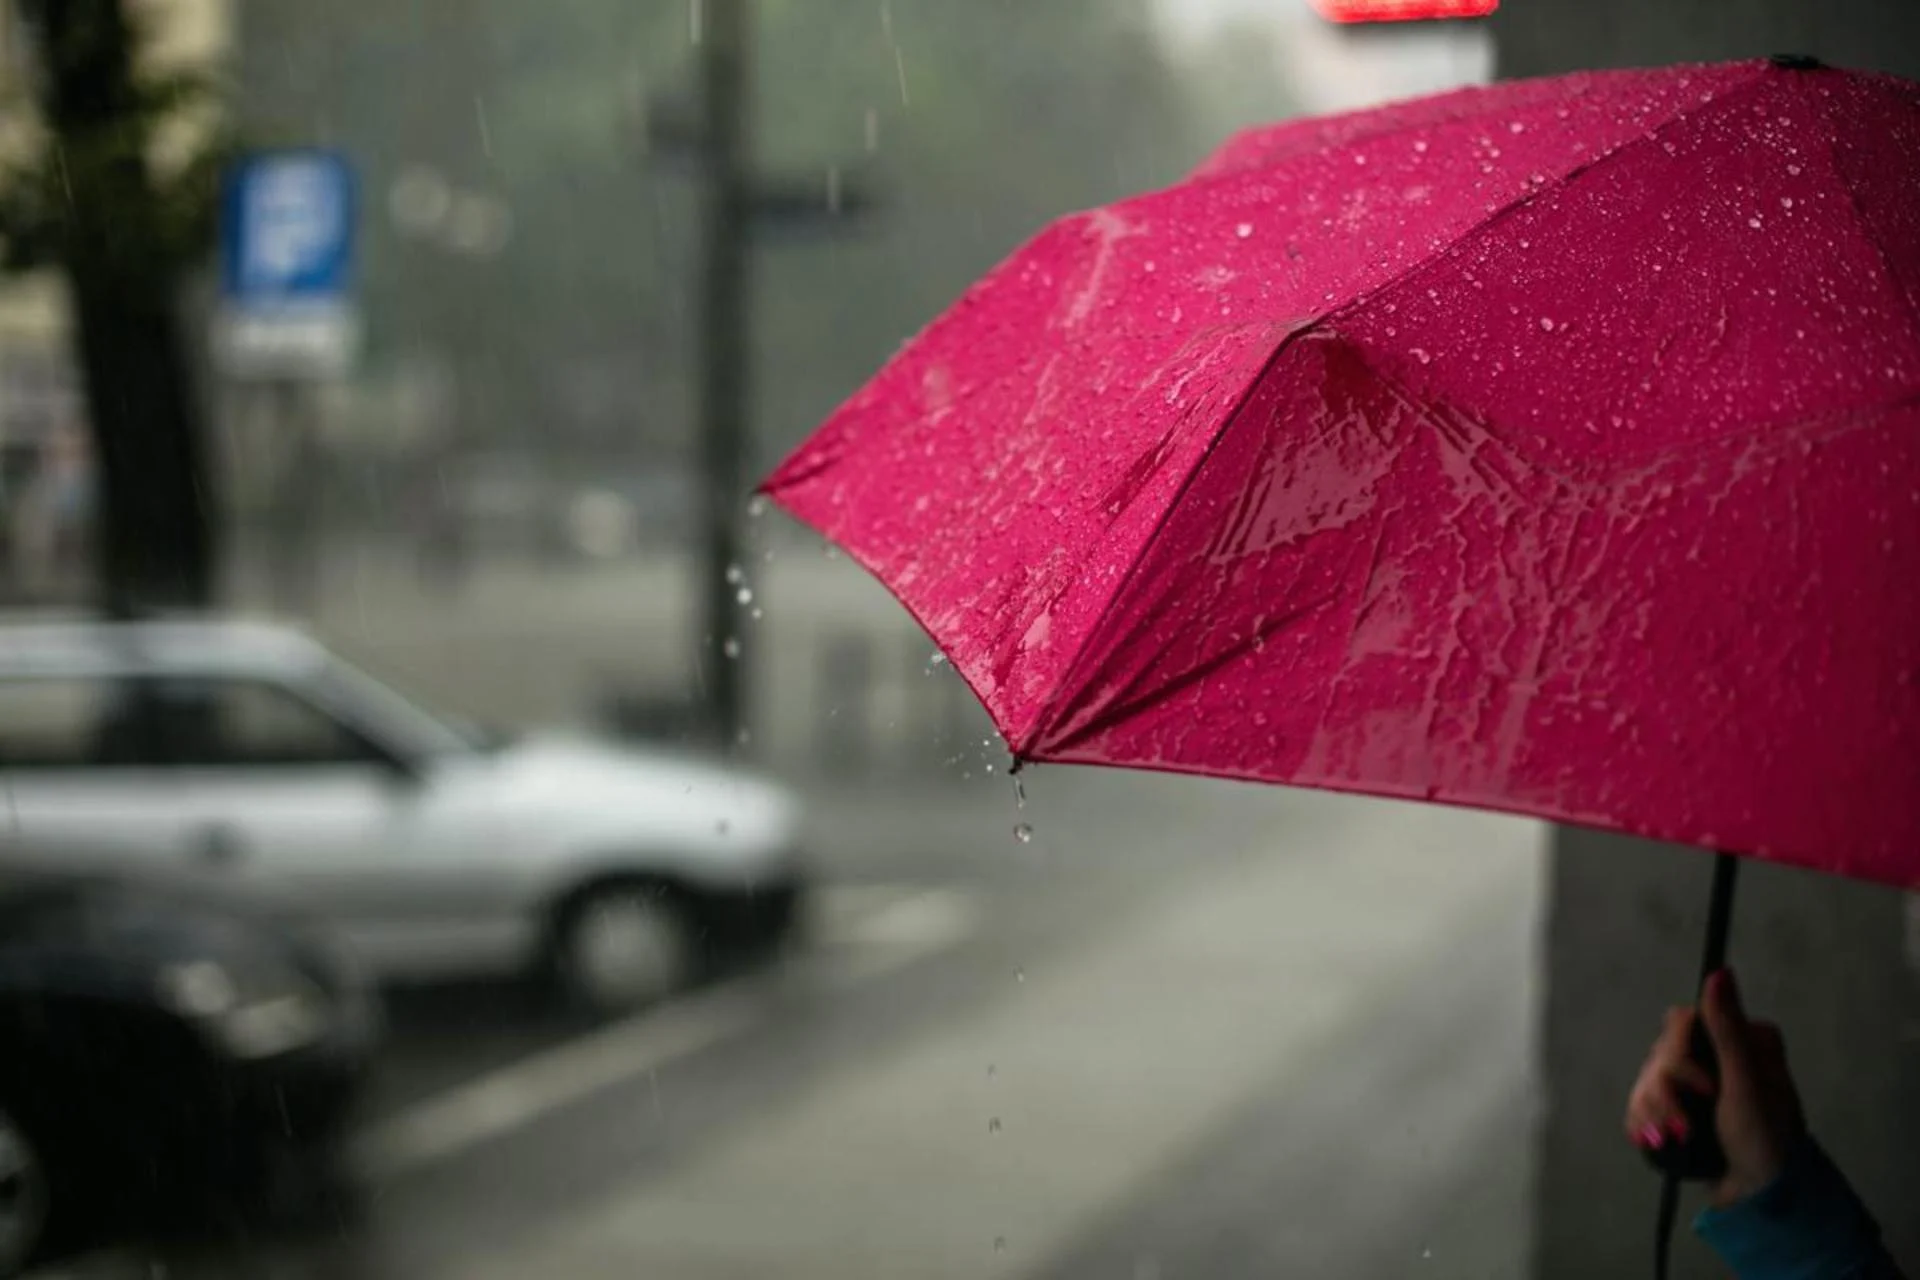 Oshawa's weekend weather forecast: Cloudy skies and April showers